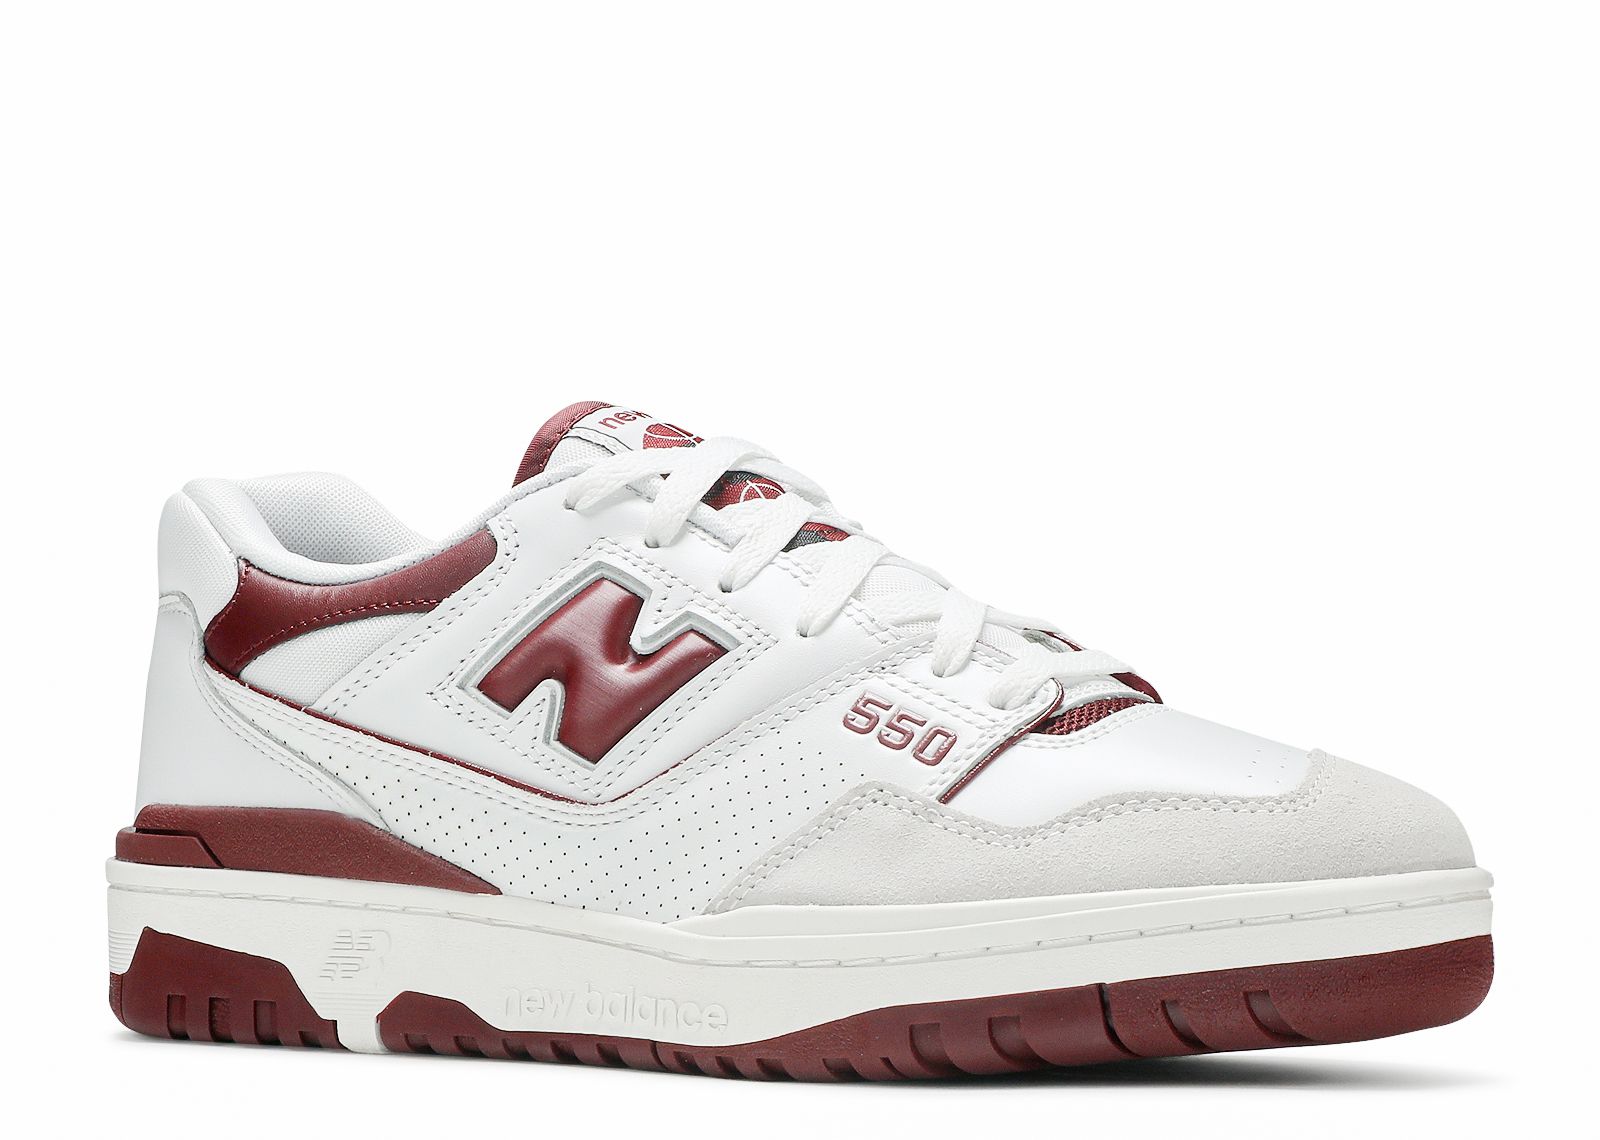 New Balance 550 Burgundy Navy Mens Shoes Size 8-12 new sneakers